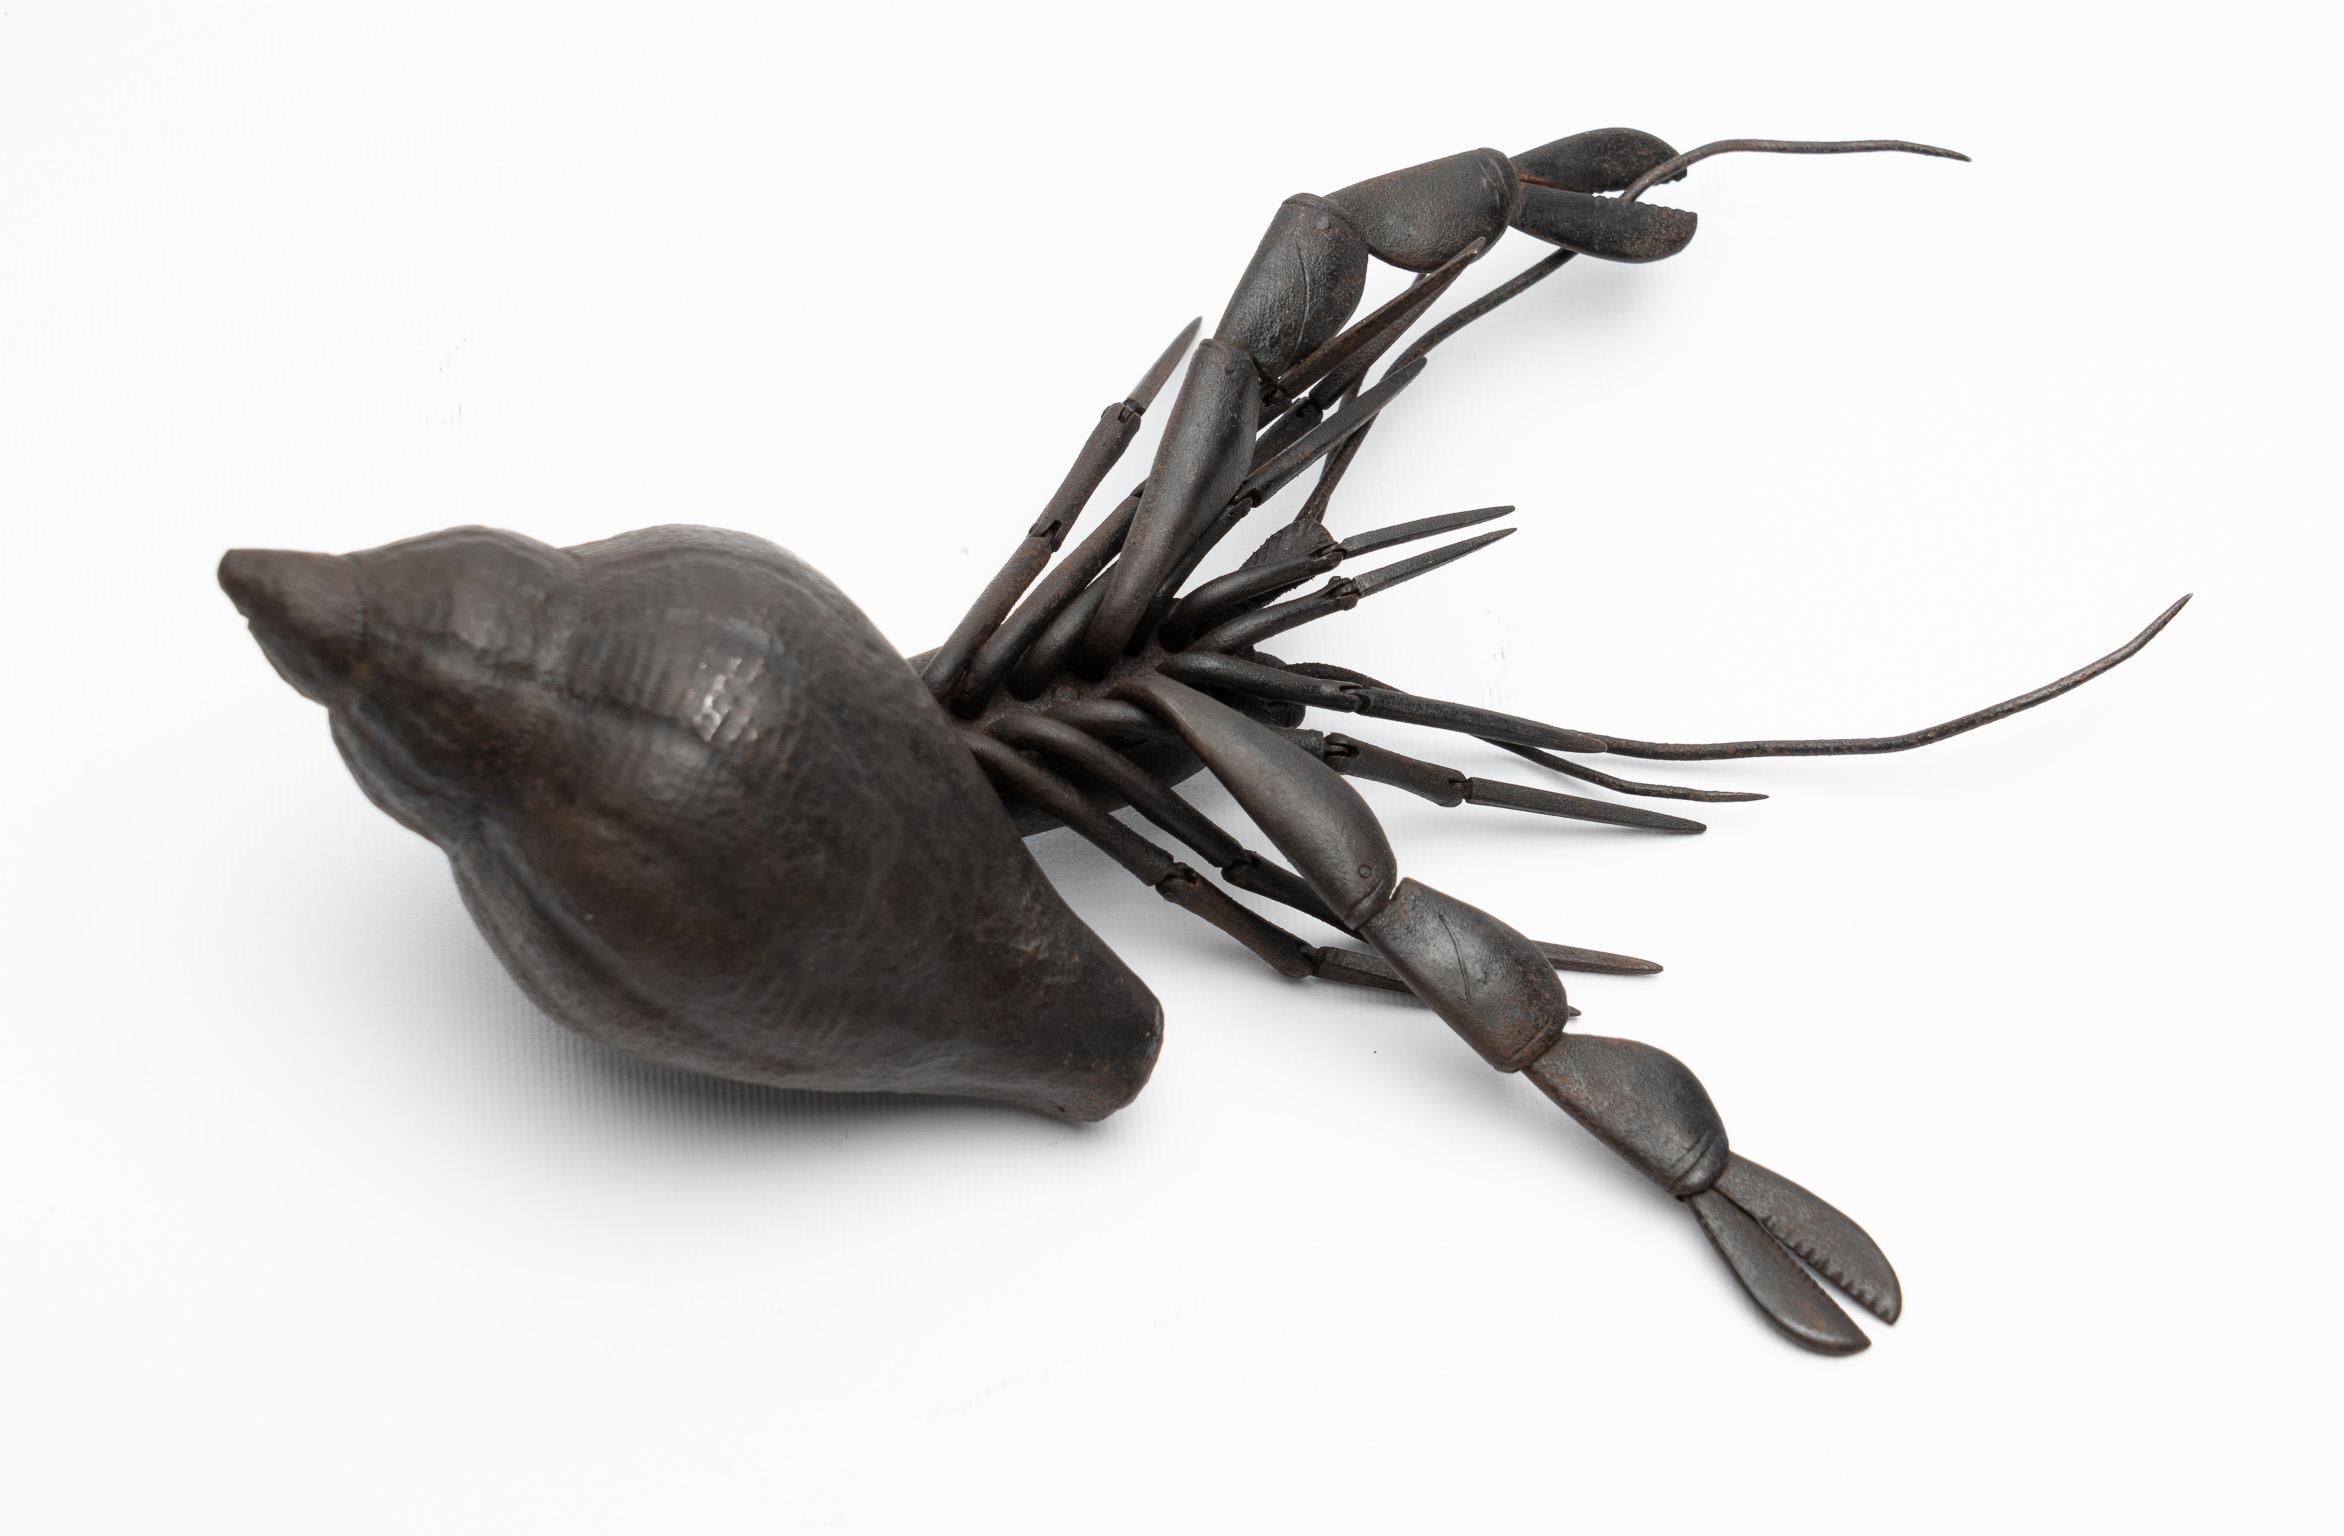 18th Century Jizai Okimono A russet-iron articulated figure of a hermit crab